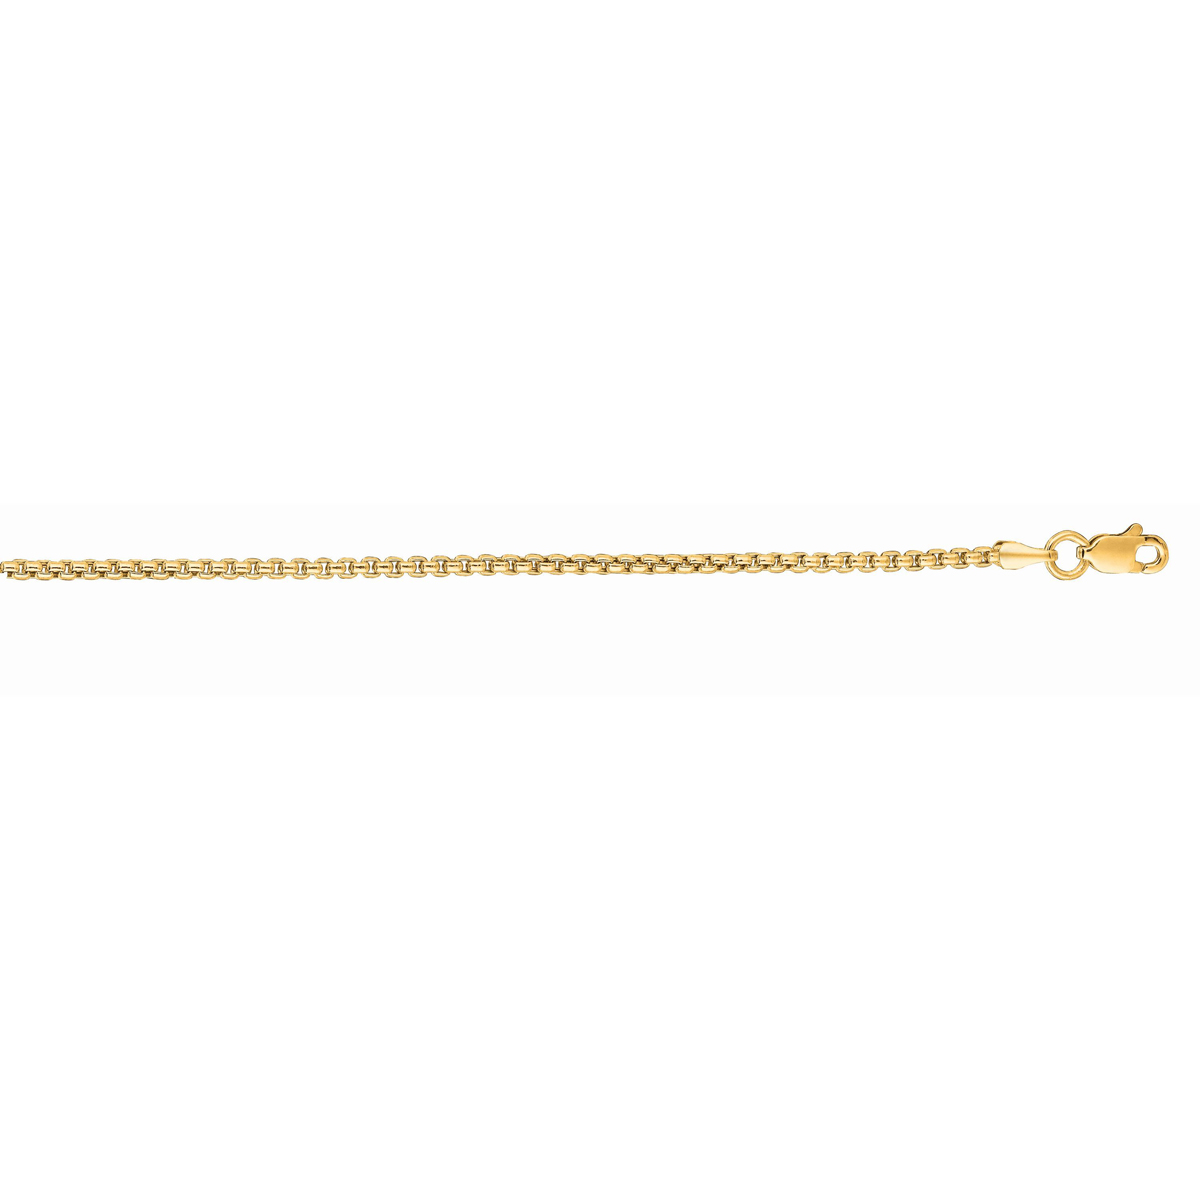 14 Karat Yellow Gold 1.3mm Round Box Link Chain Measuring 18" Long With A Lobster Clasp